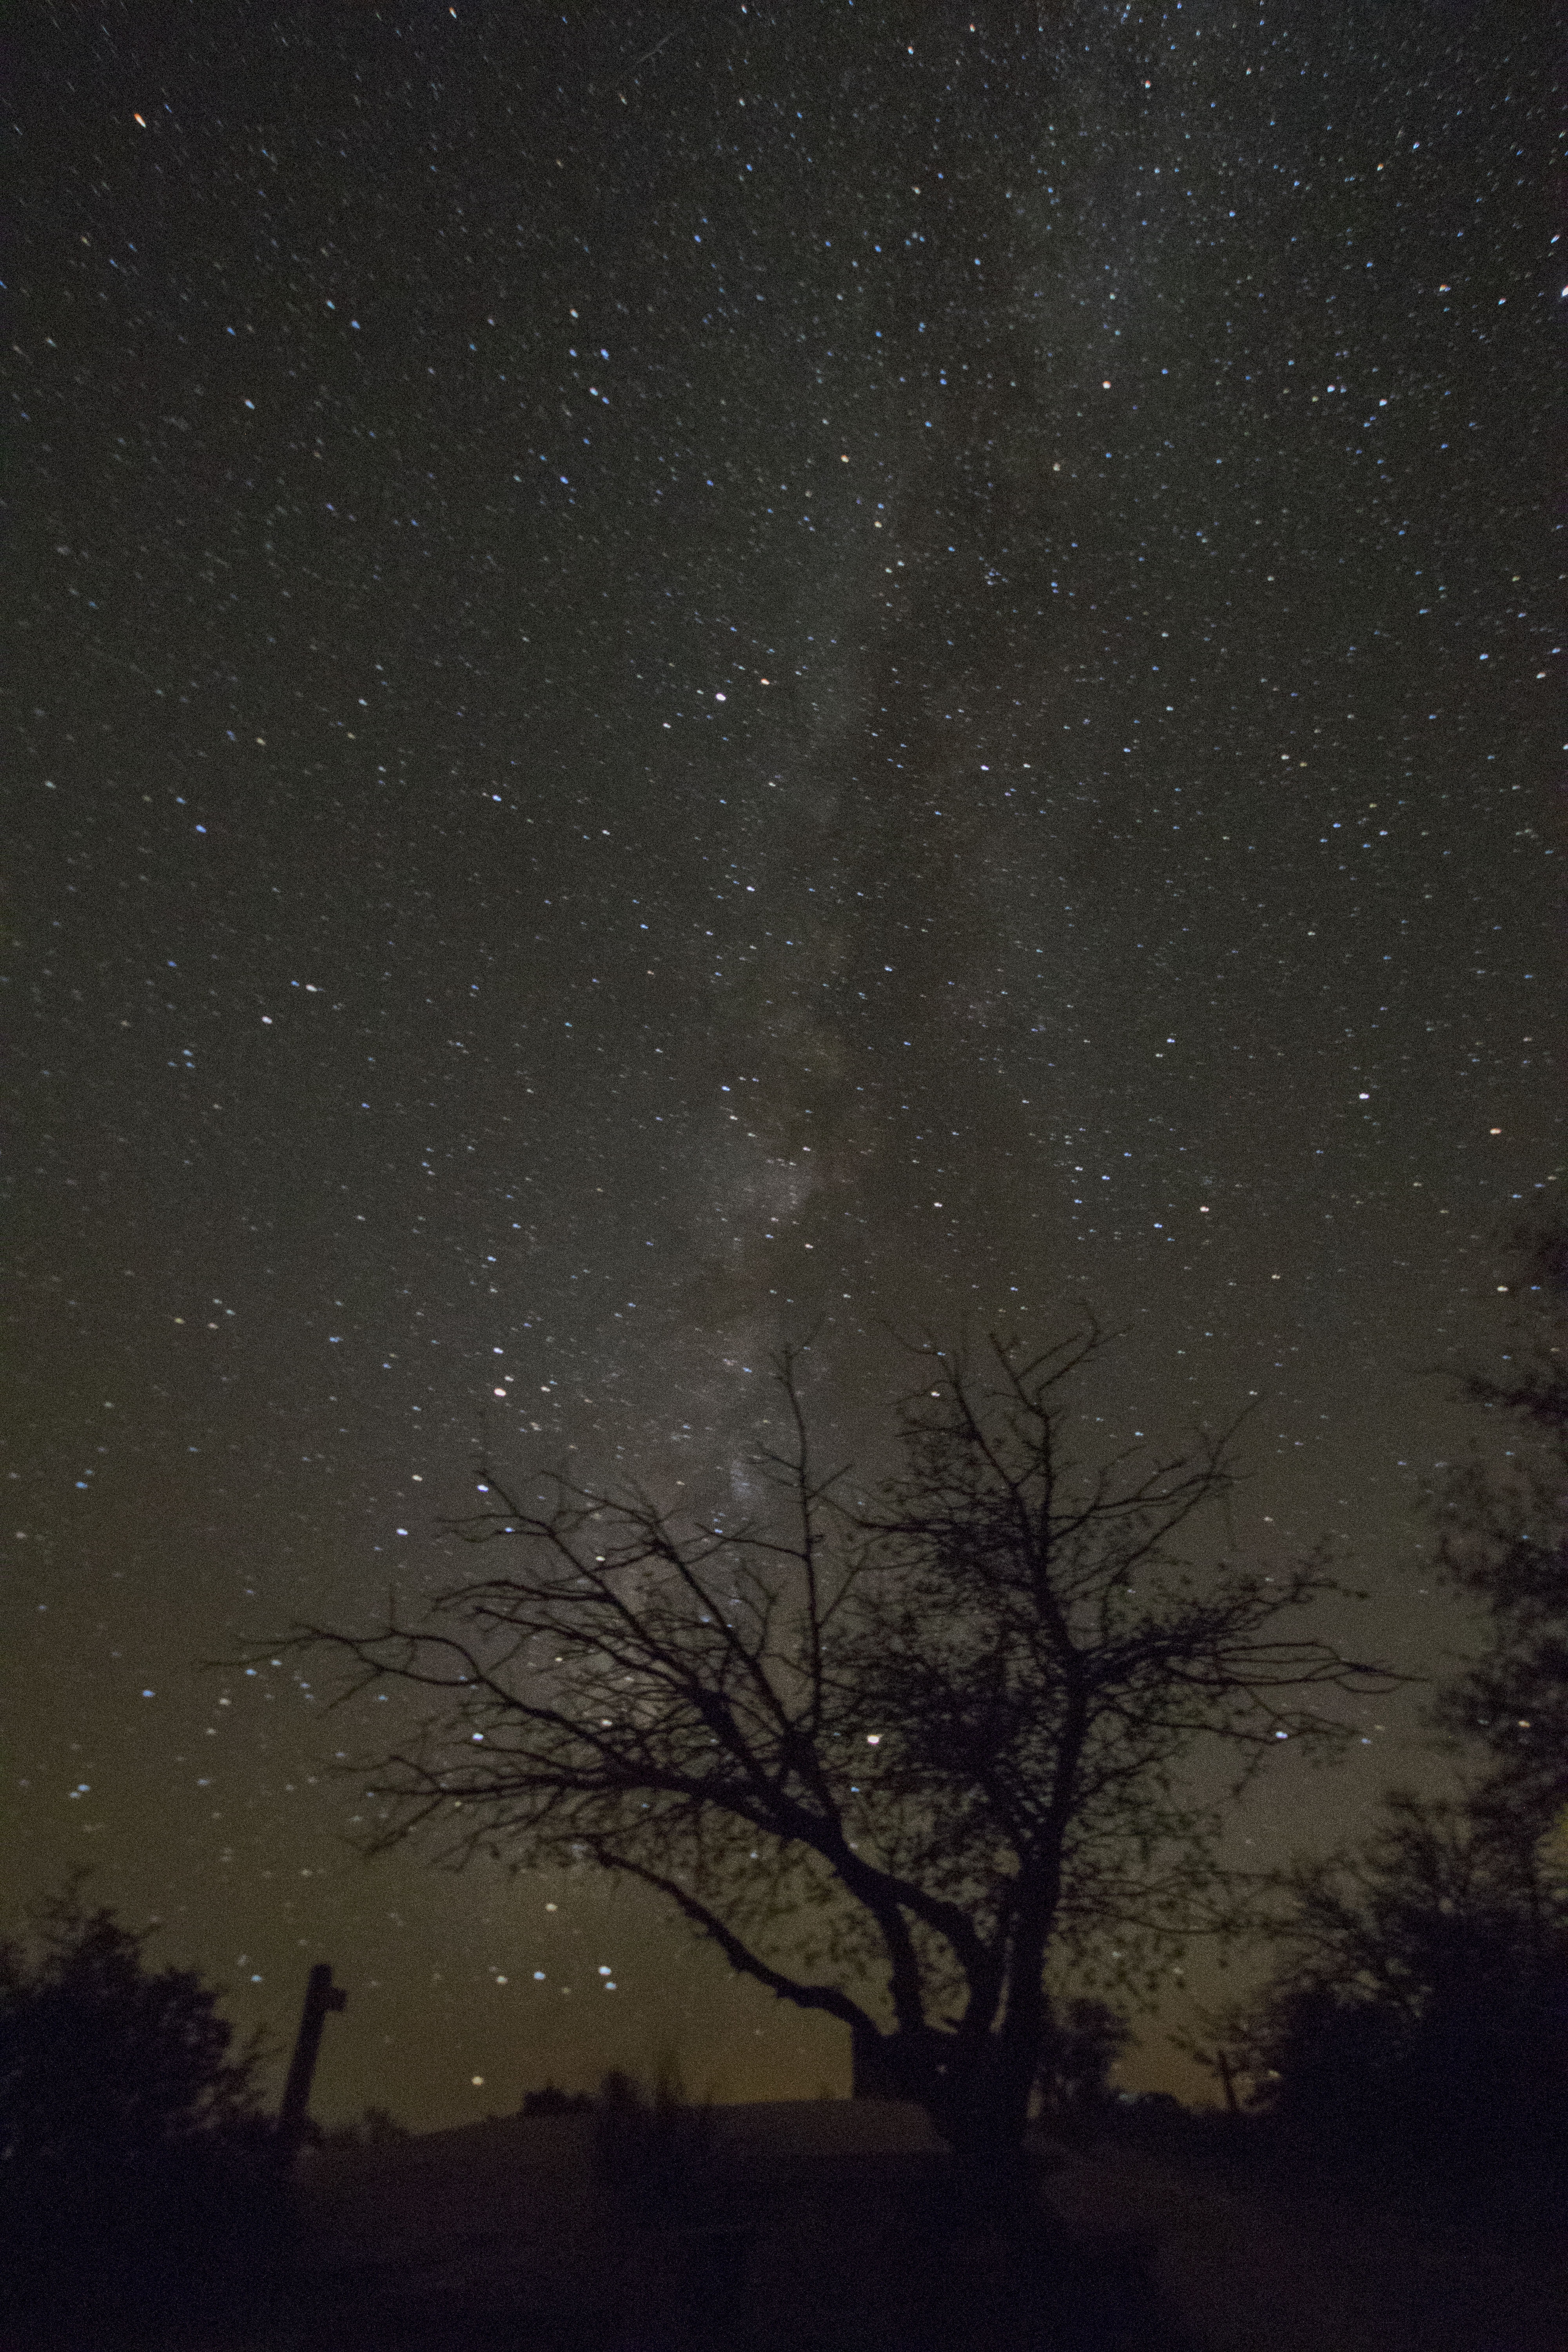 Milky Way from Davis Mtn State Park